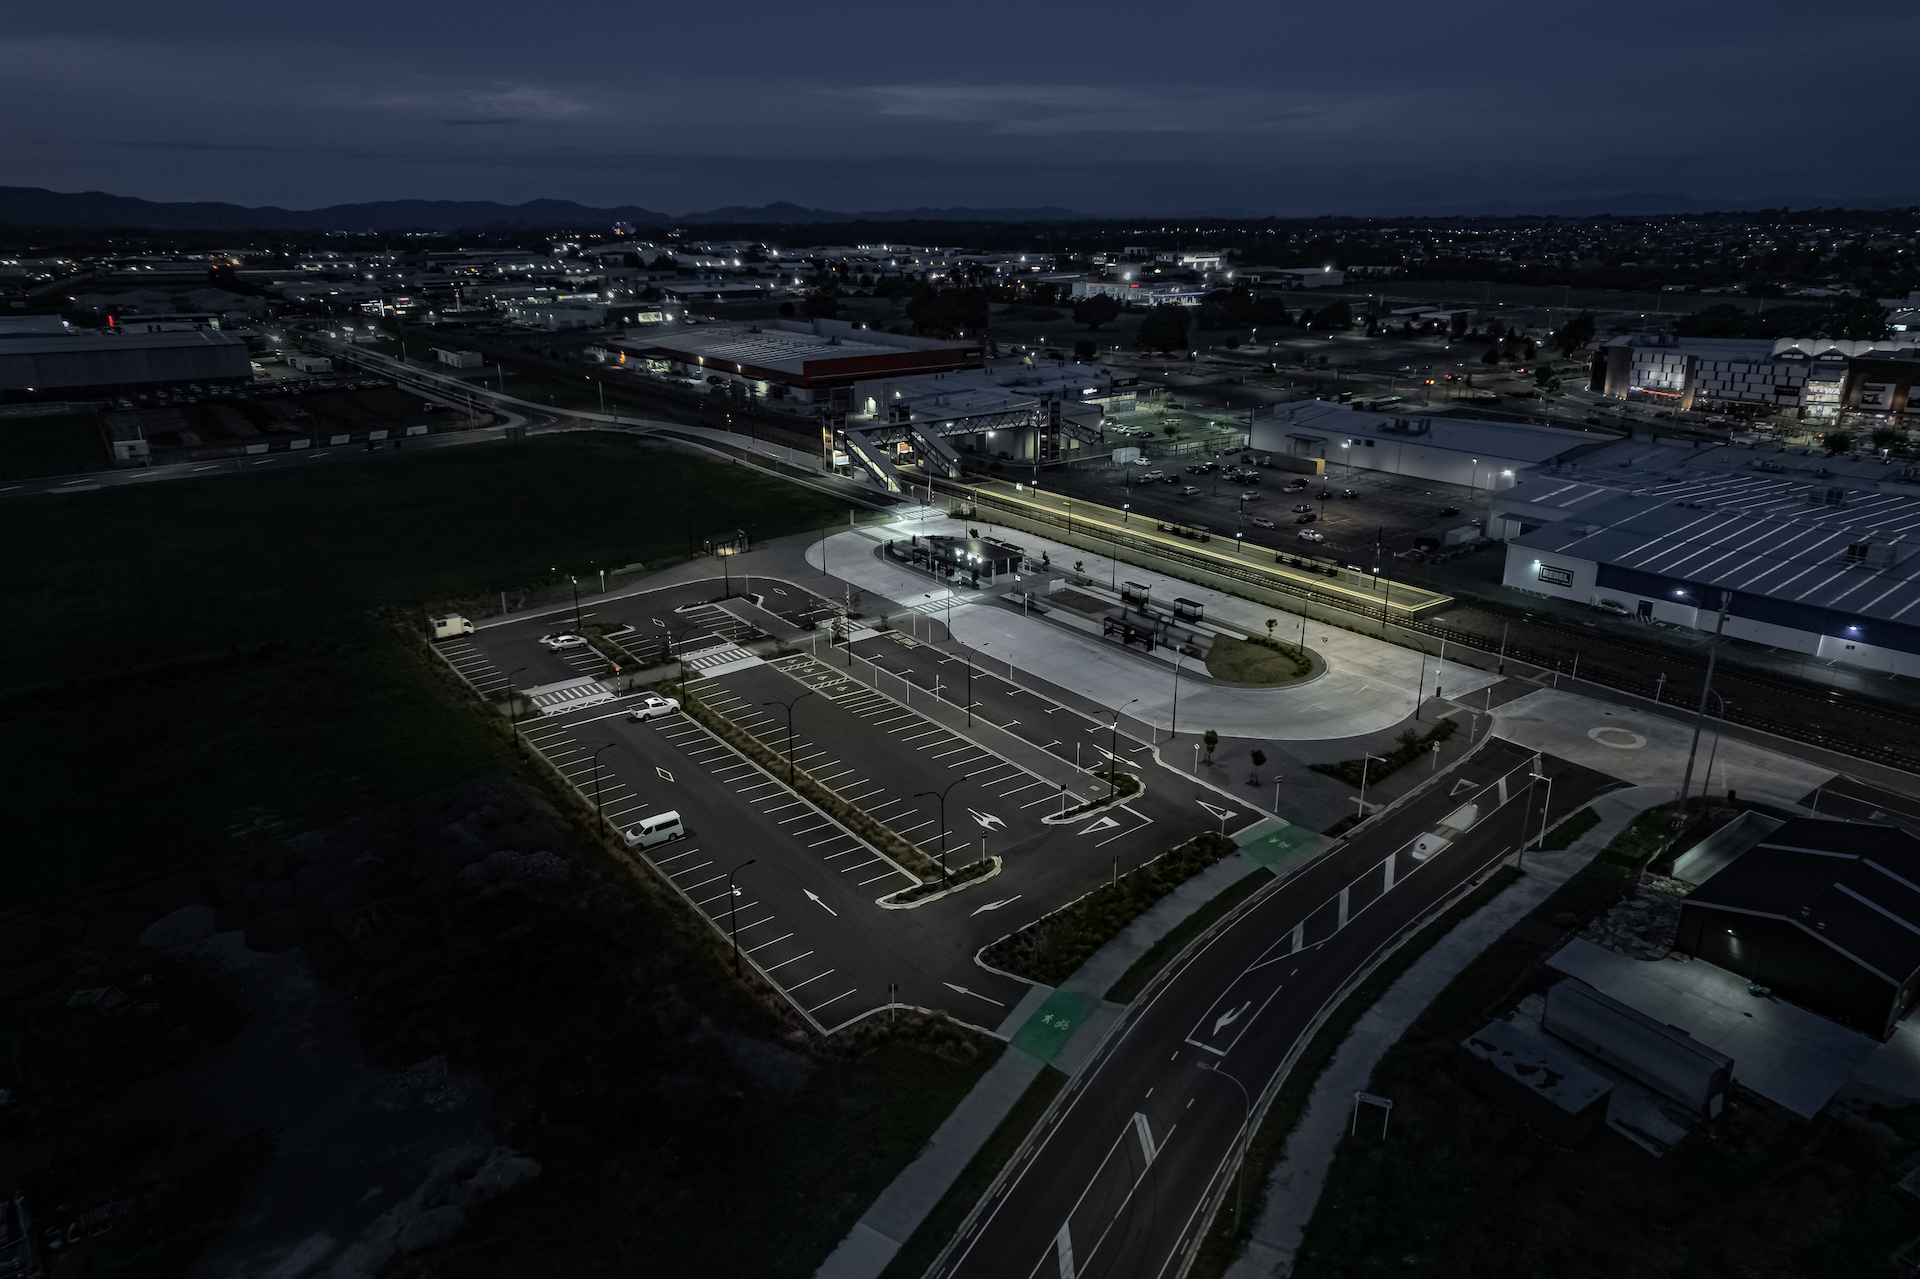 Overview of Rotokauri parking at night illuminated by ibex lighting solutions.